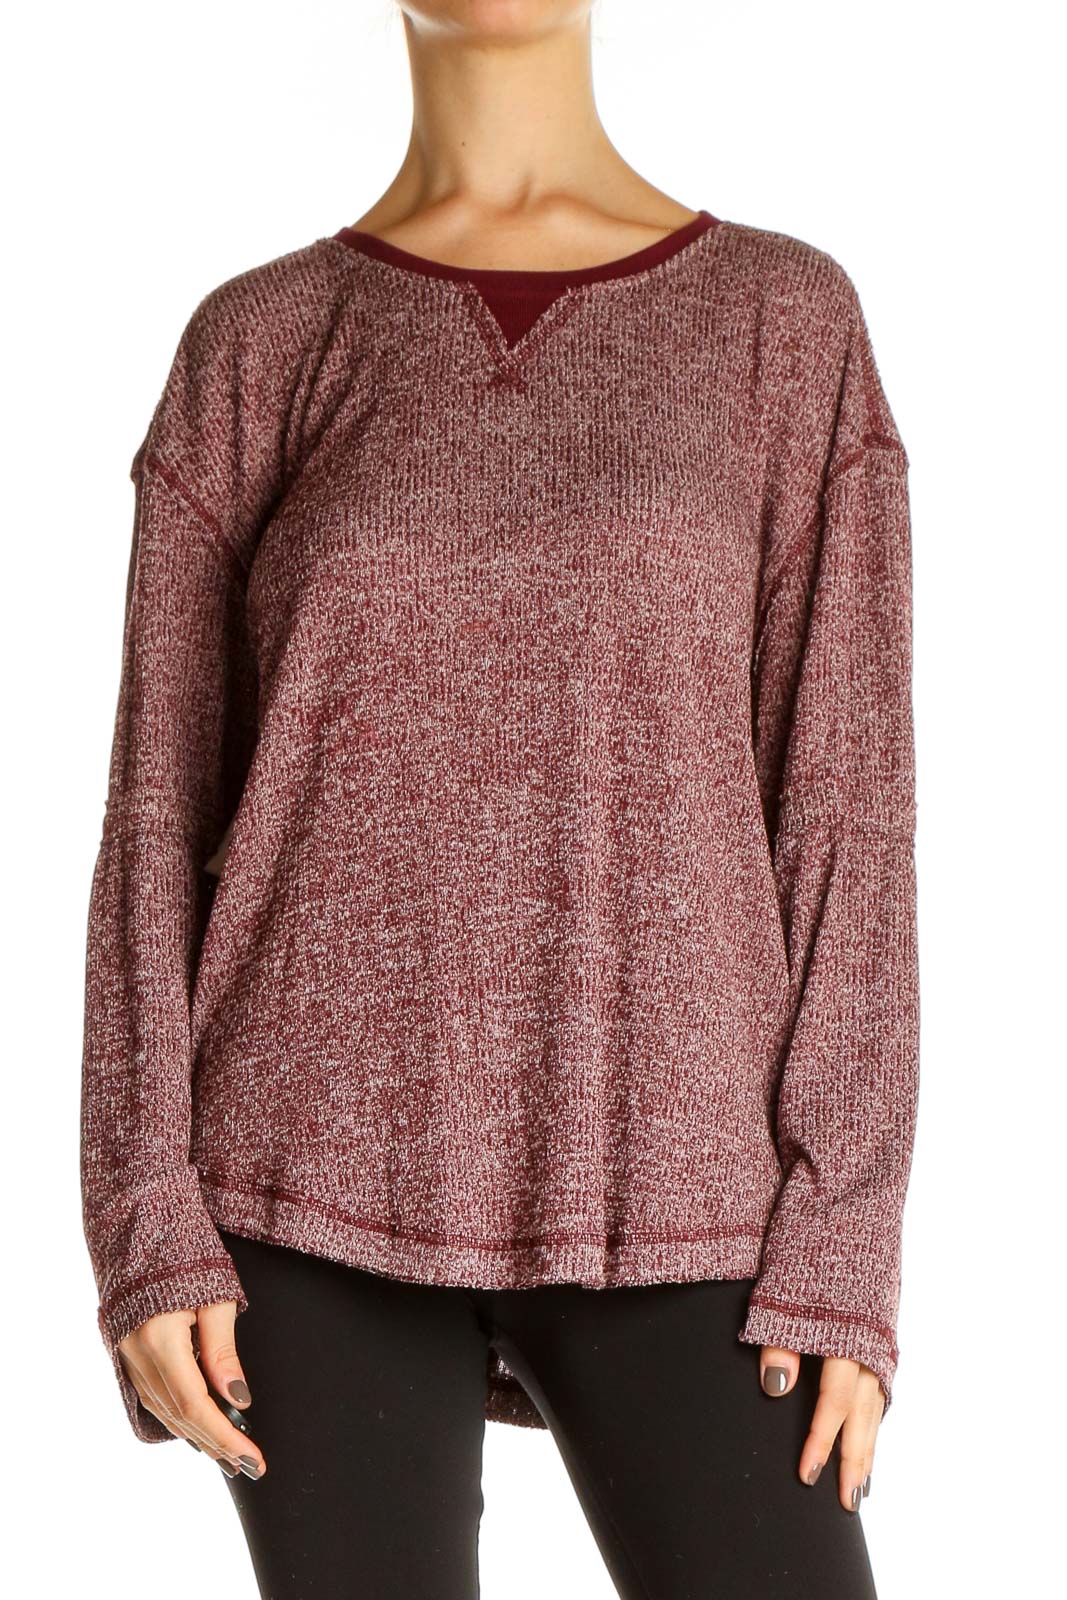 Red Textured All Day Wear Sweater Front